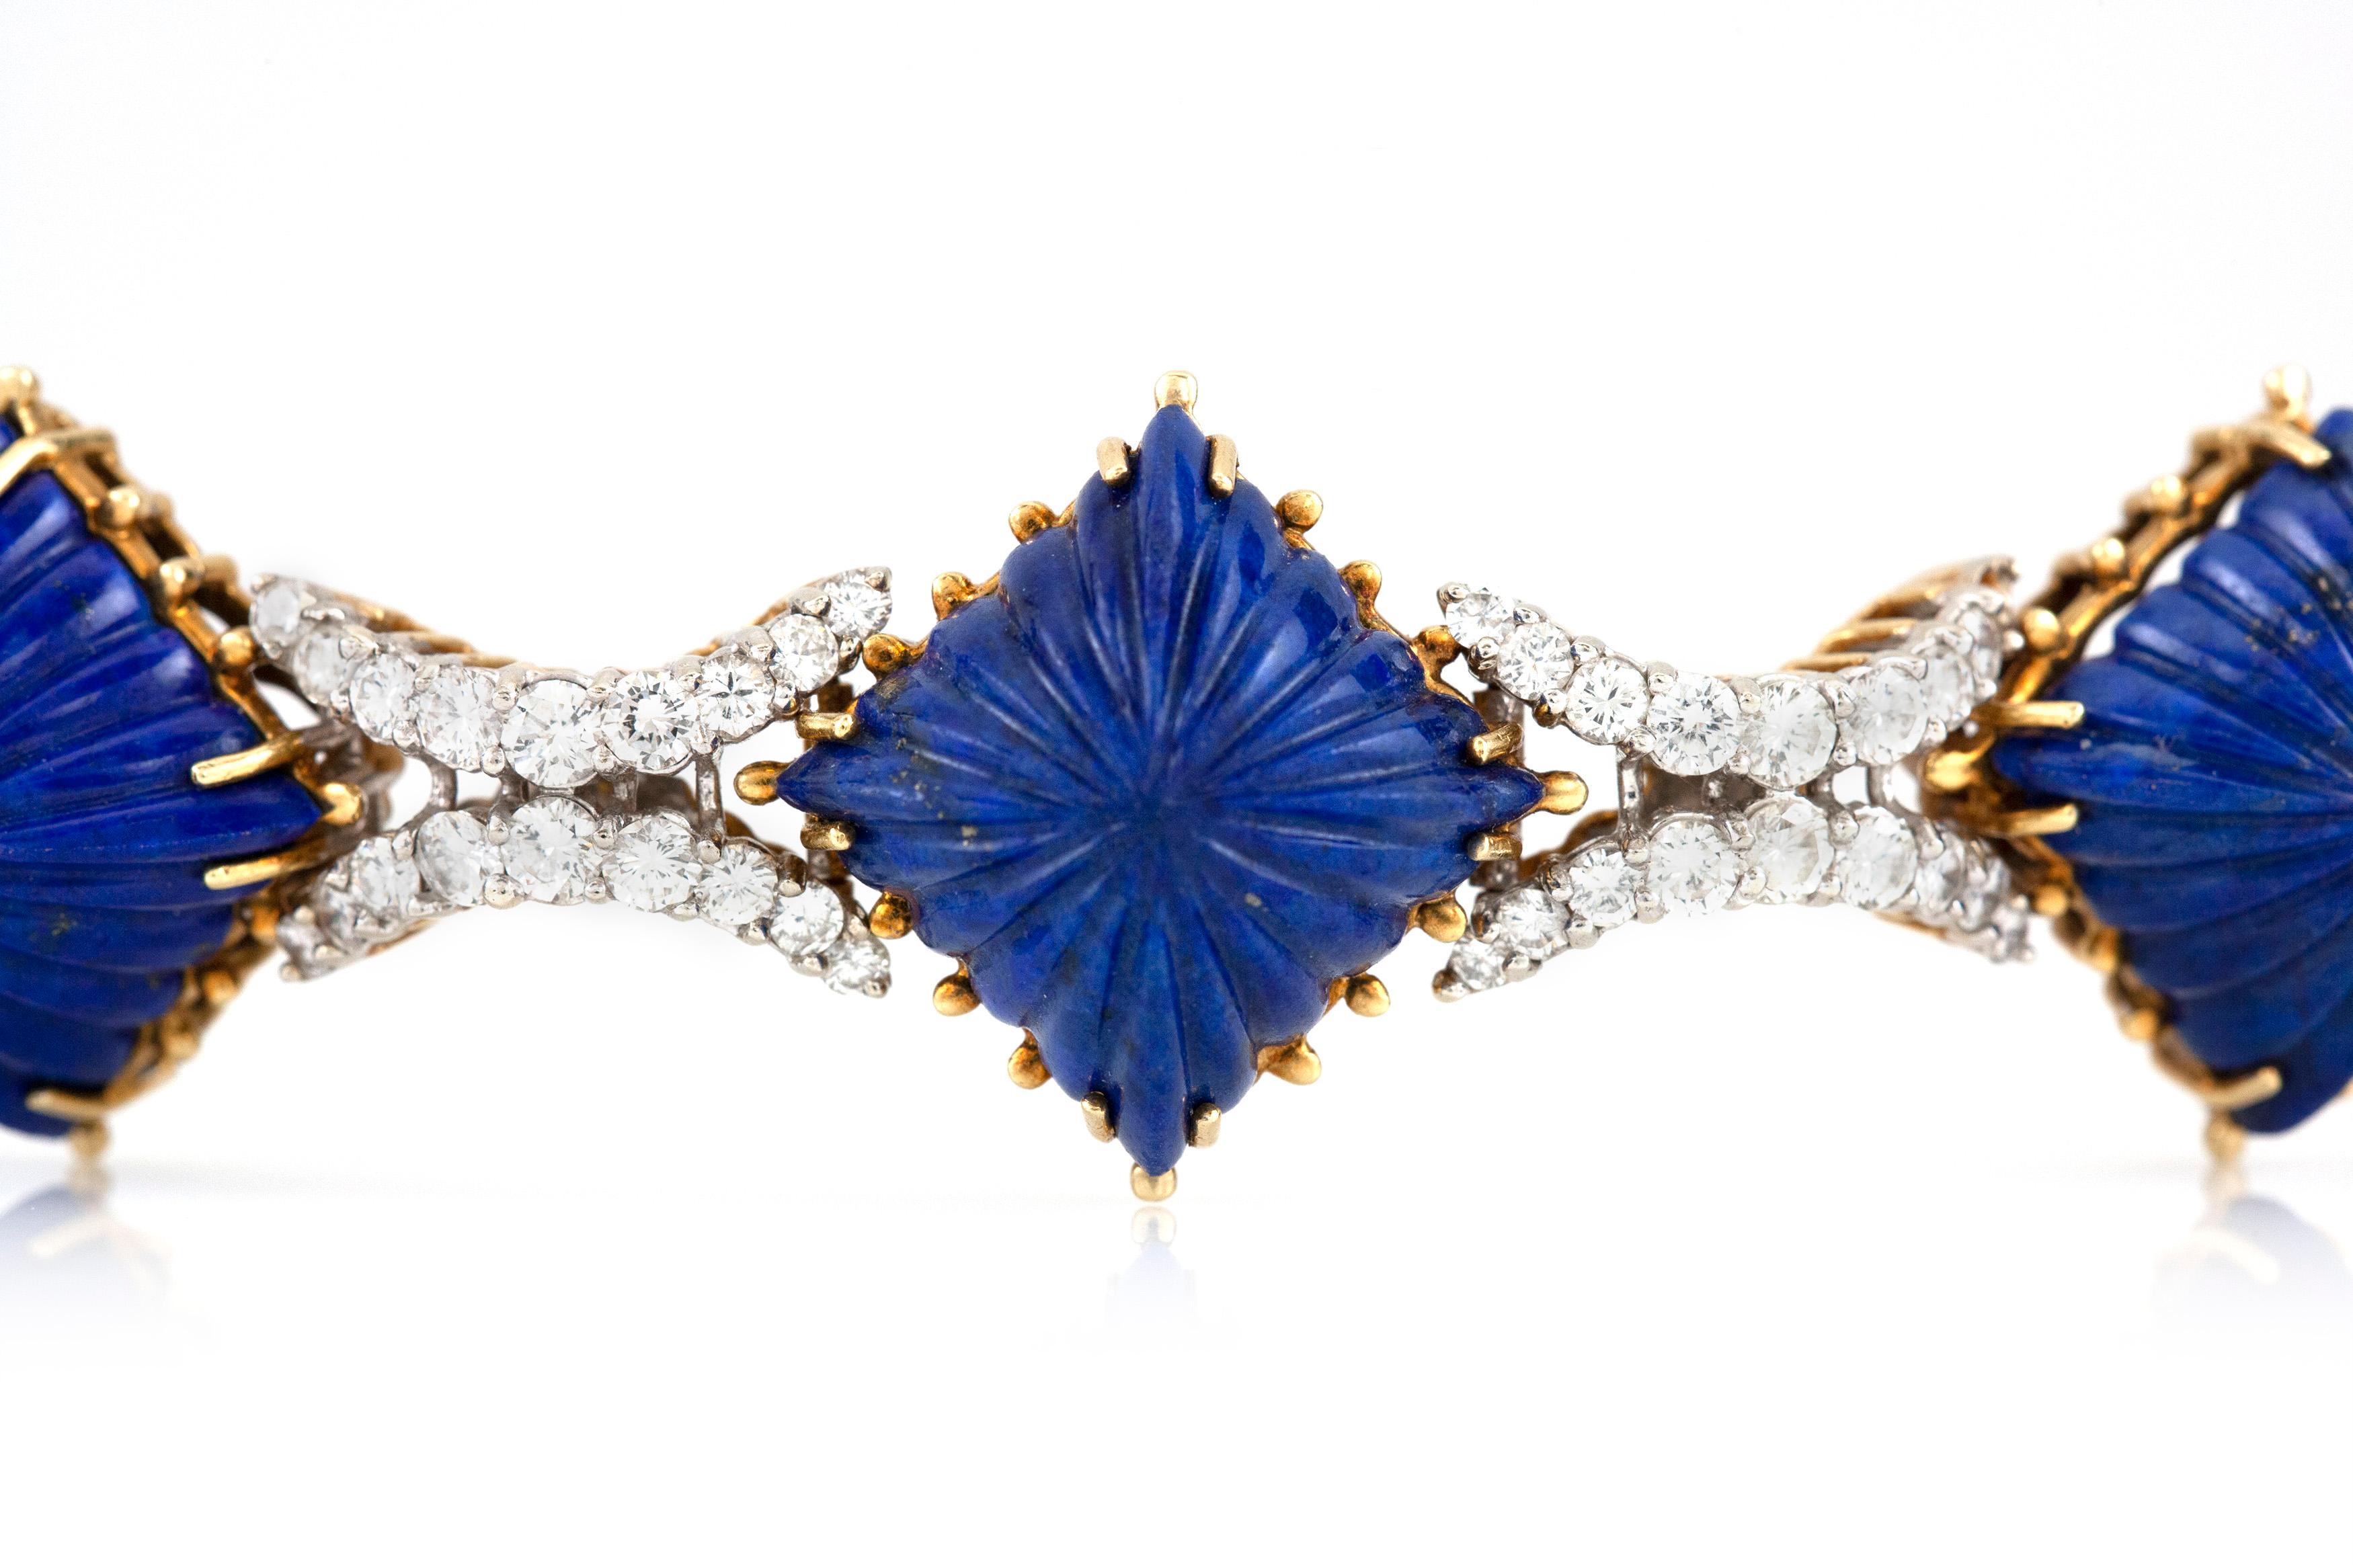 The bracelet is finely crafted in 18k yellow gold with five lapis and diamonds weighing approximately total of 6.00 carat.